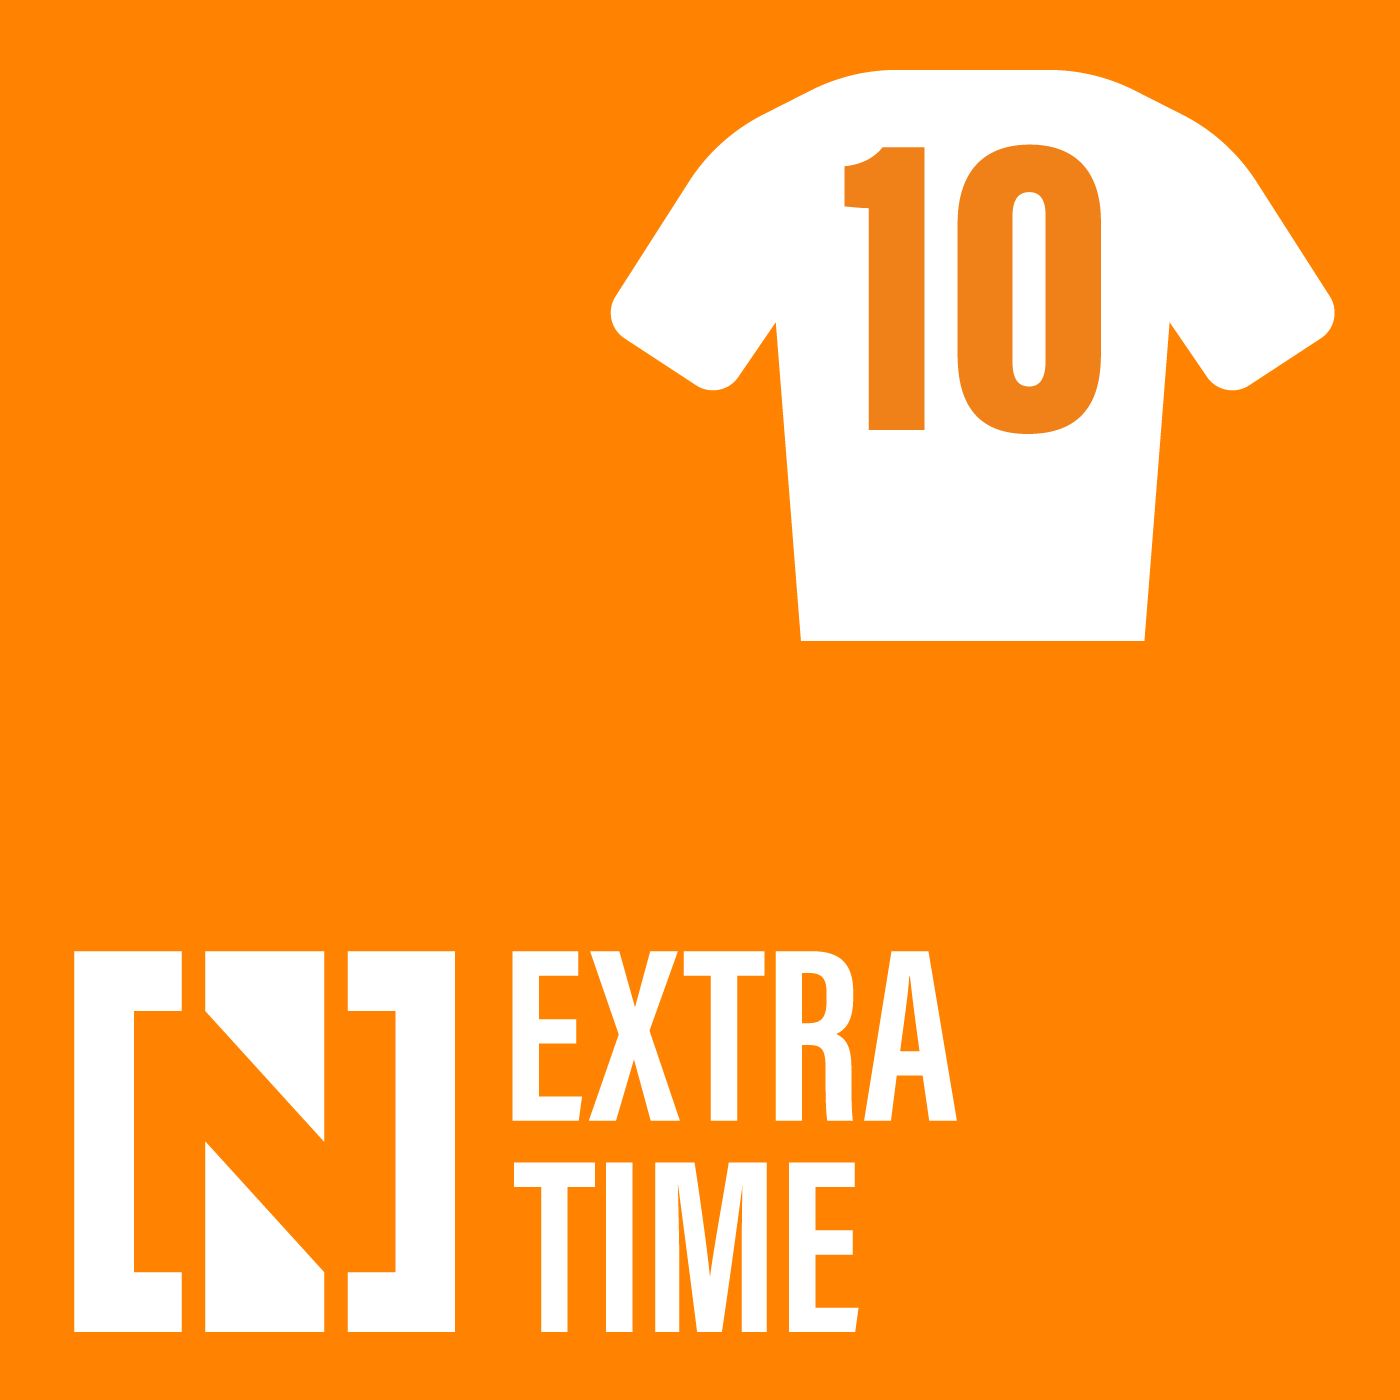 Extra limited. Extra time. Extra less.